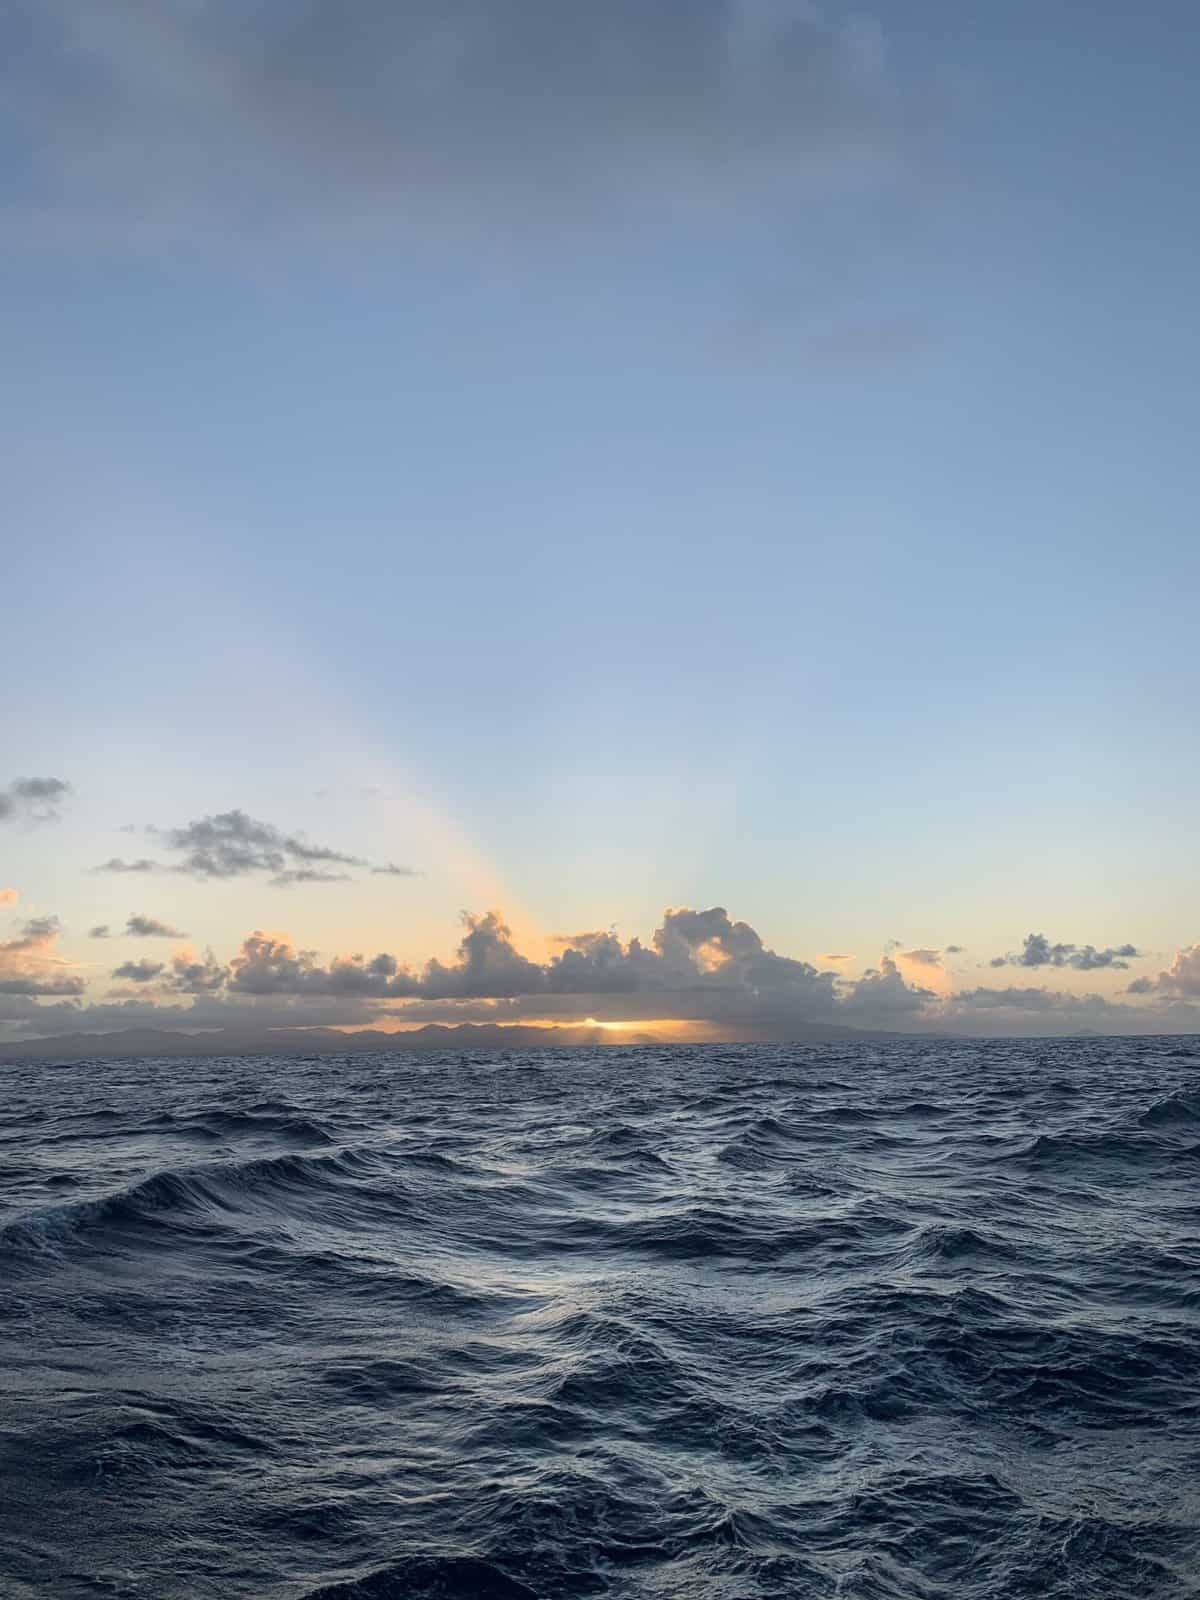 Sunset on the water while sailing the Mona Passage